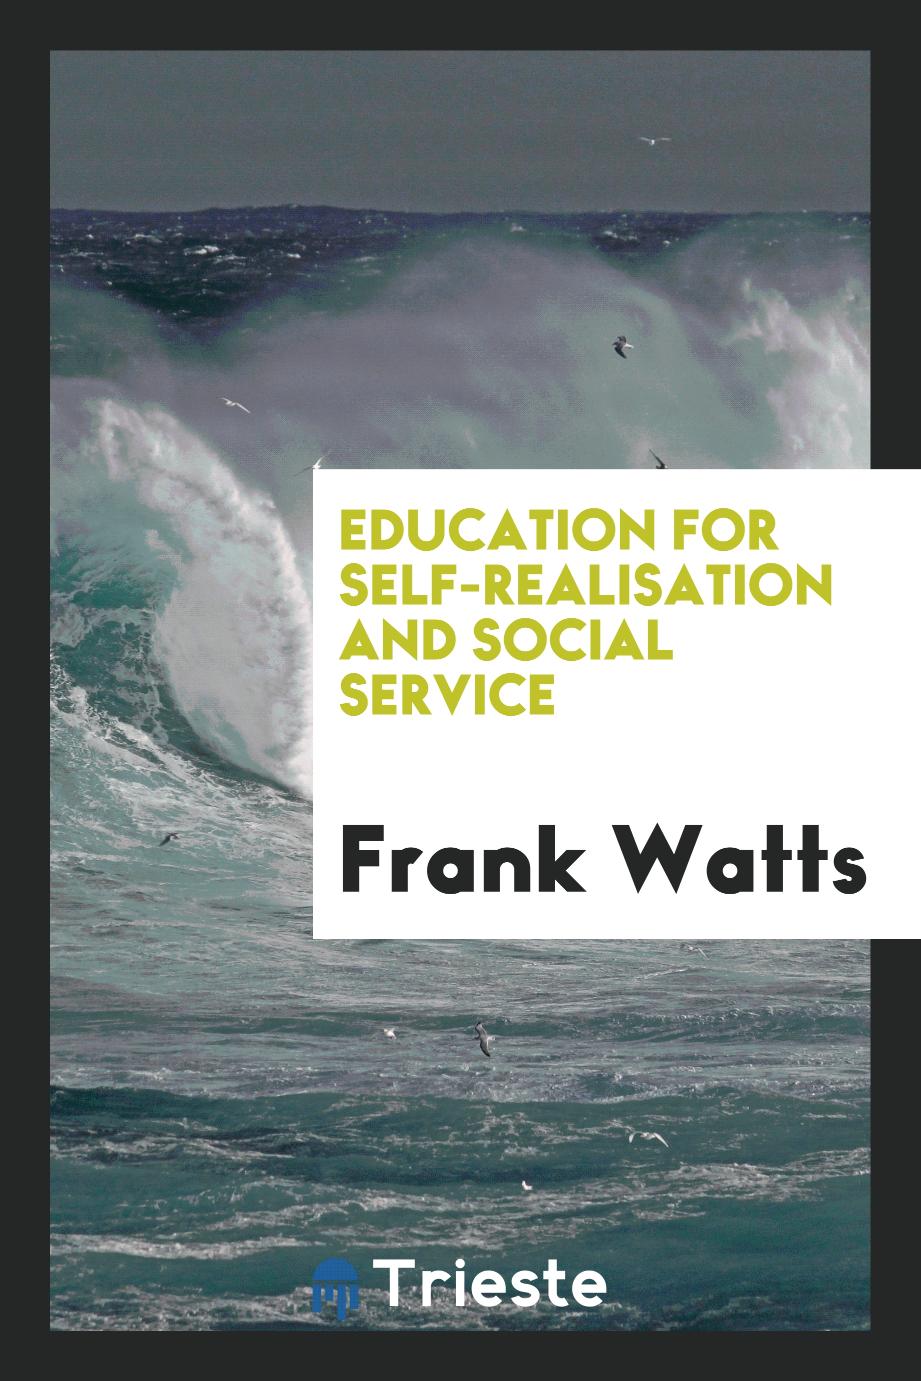 Education for self-realisation and social service